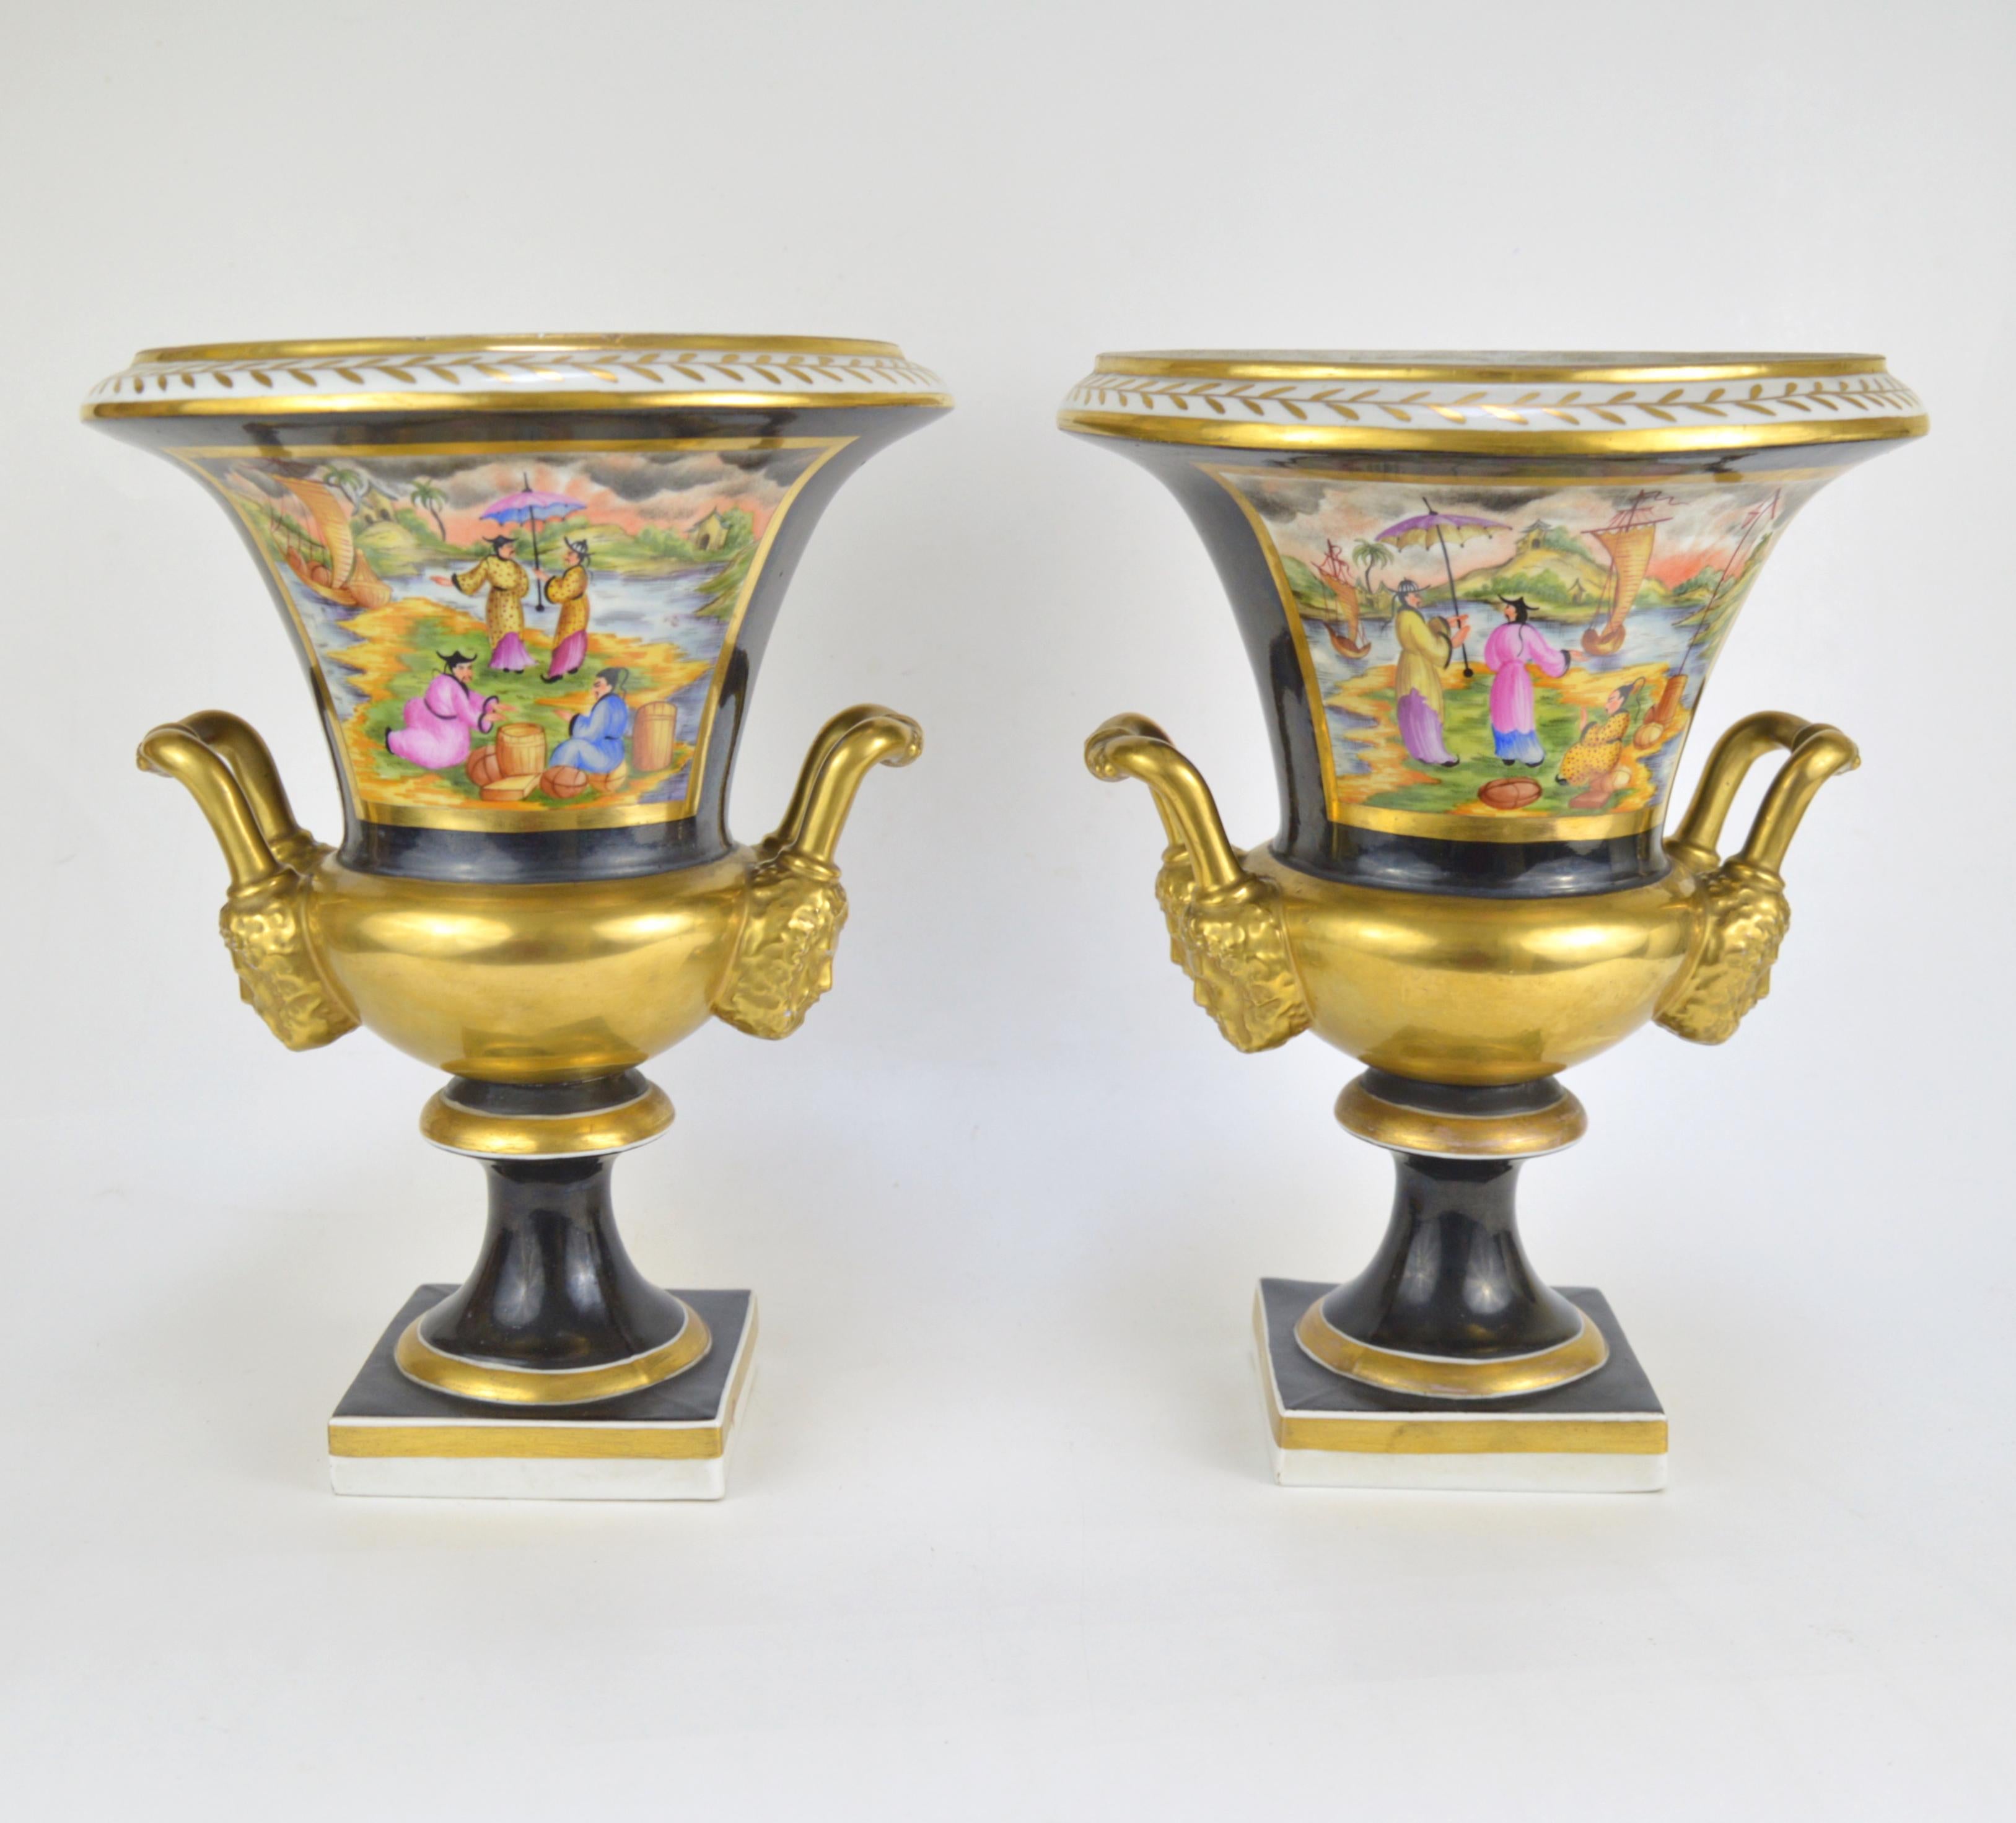 Pair of Medici Porcelain Vases Chinoiserie Style Decoration For Sale 3